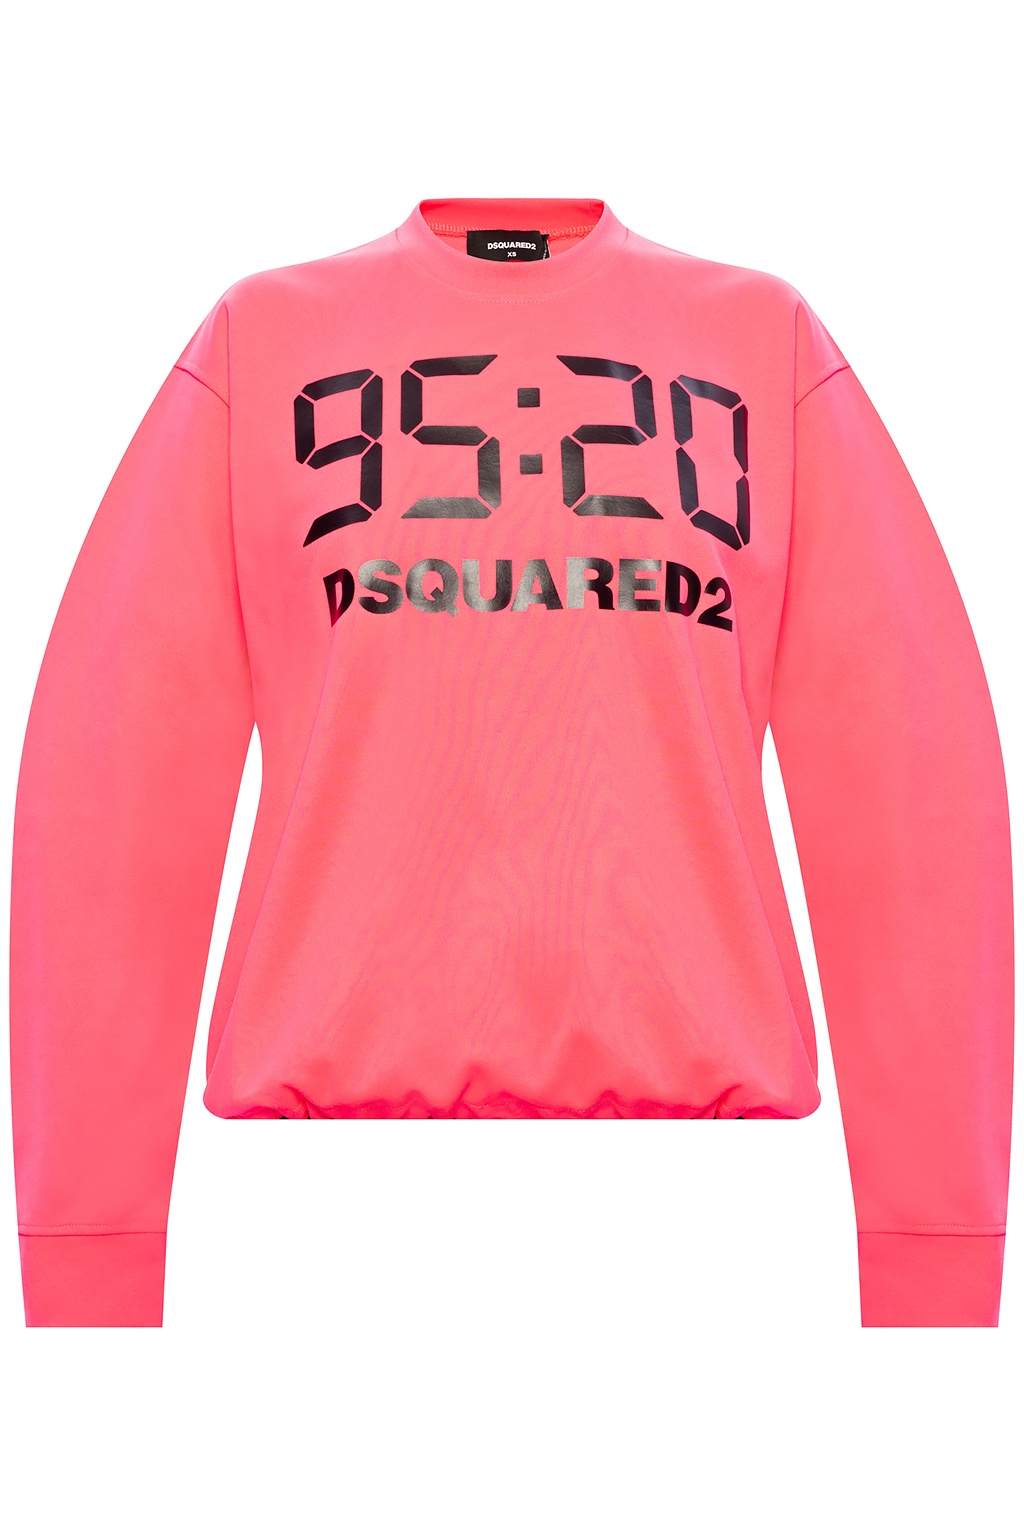 Dsquared2 Sweatshirt 25th Anniversary Collection | Women's